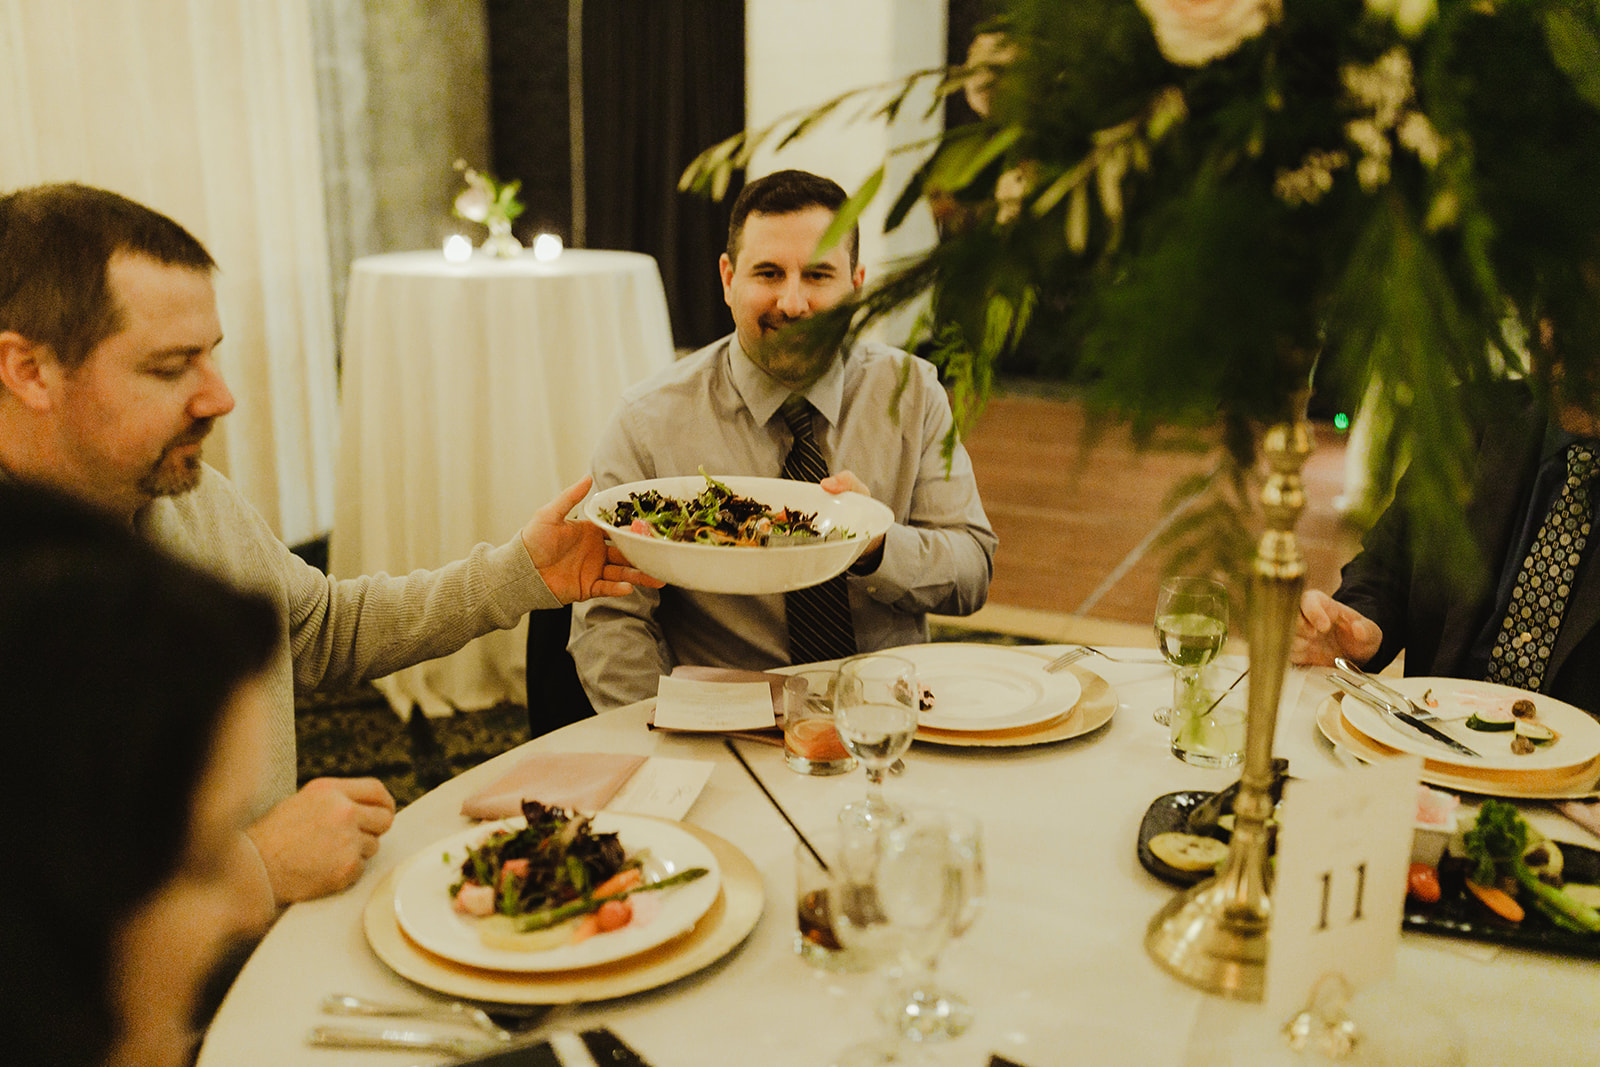 Guests passing around a plate of food during a Grand Rapids, Michigan wedding